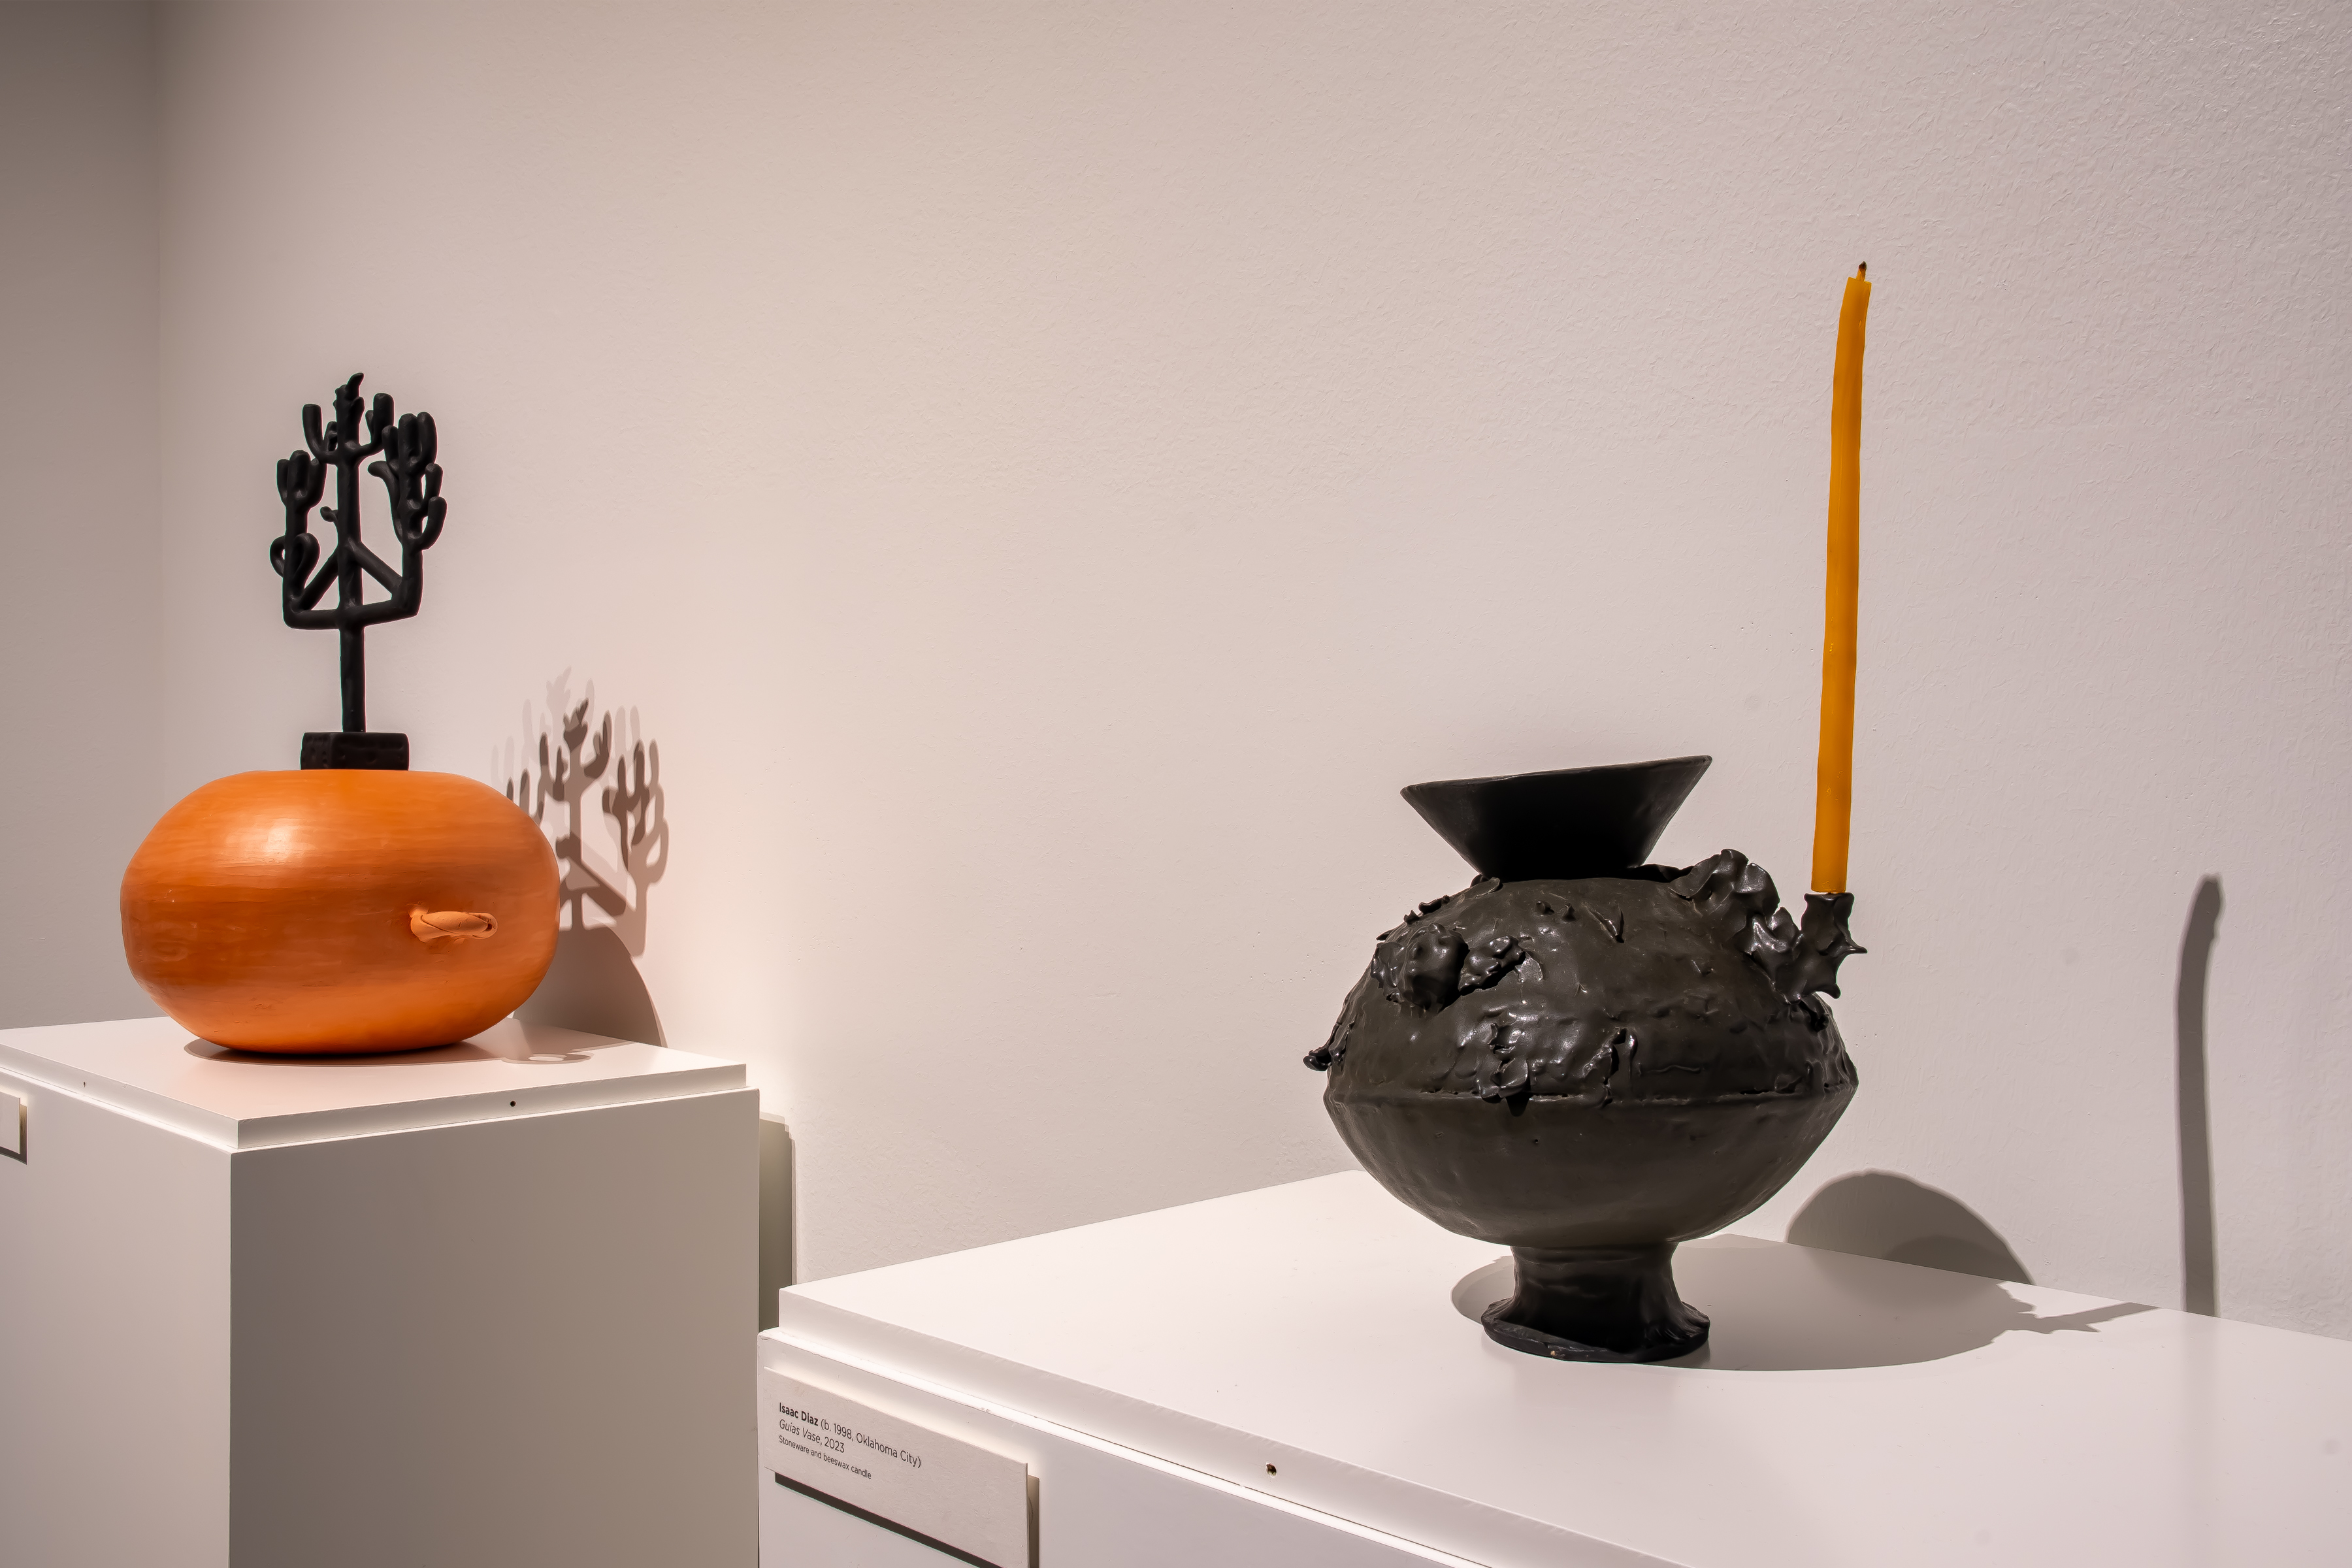 Two ceramic vessels sit on white plinths. On the left, the vessel is orange and holds a black candelabra-like piece on top. On the right, the vessel is black and holds a tall yellow candle on the right side.